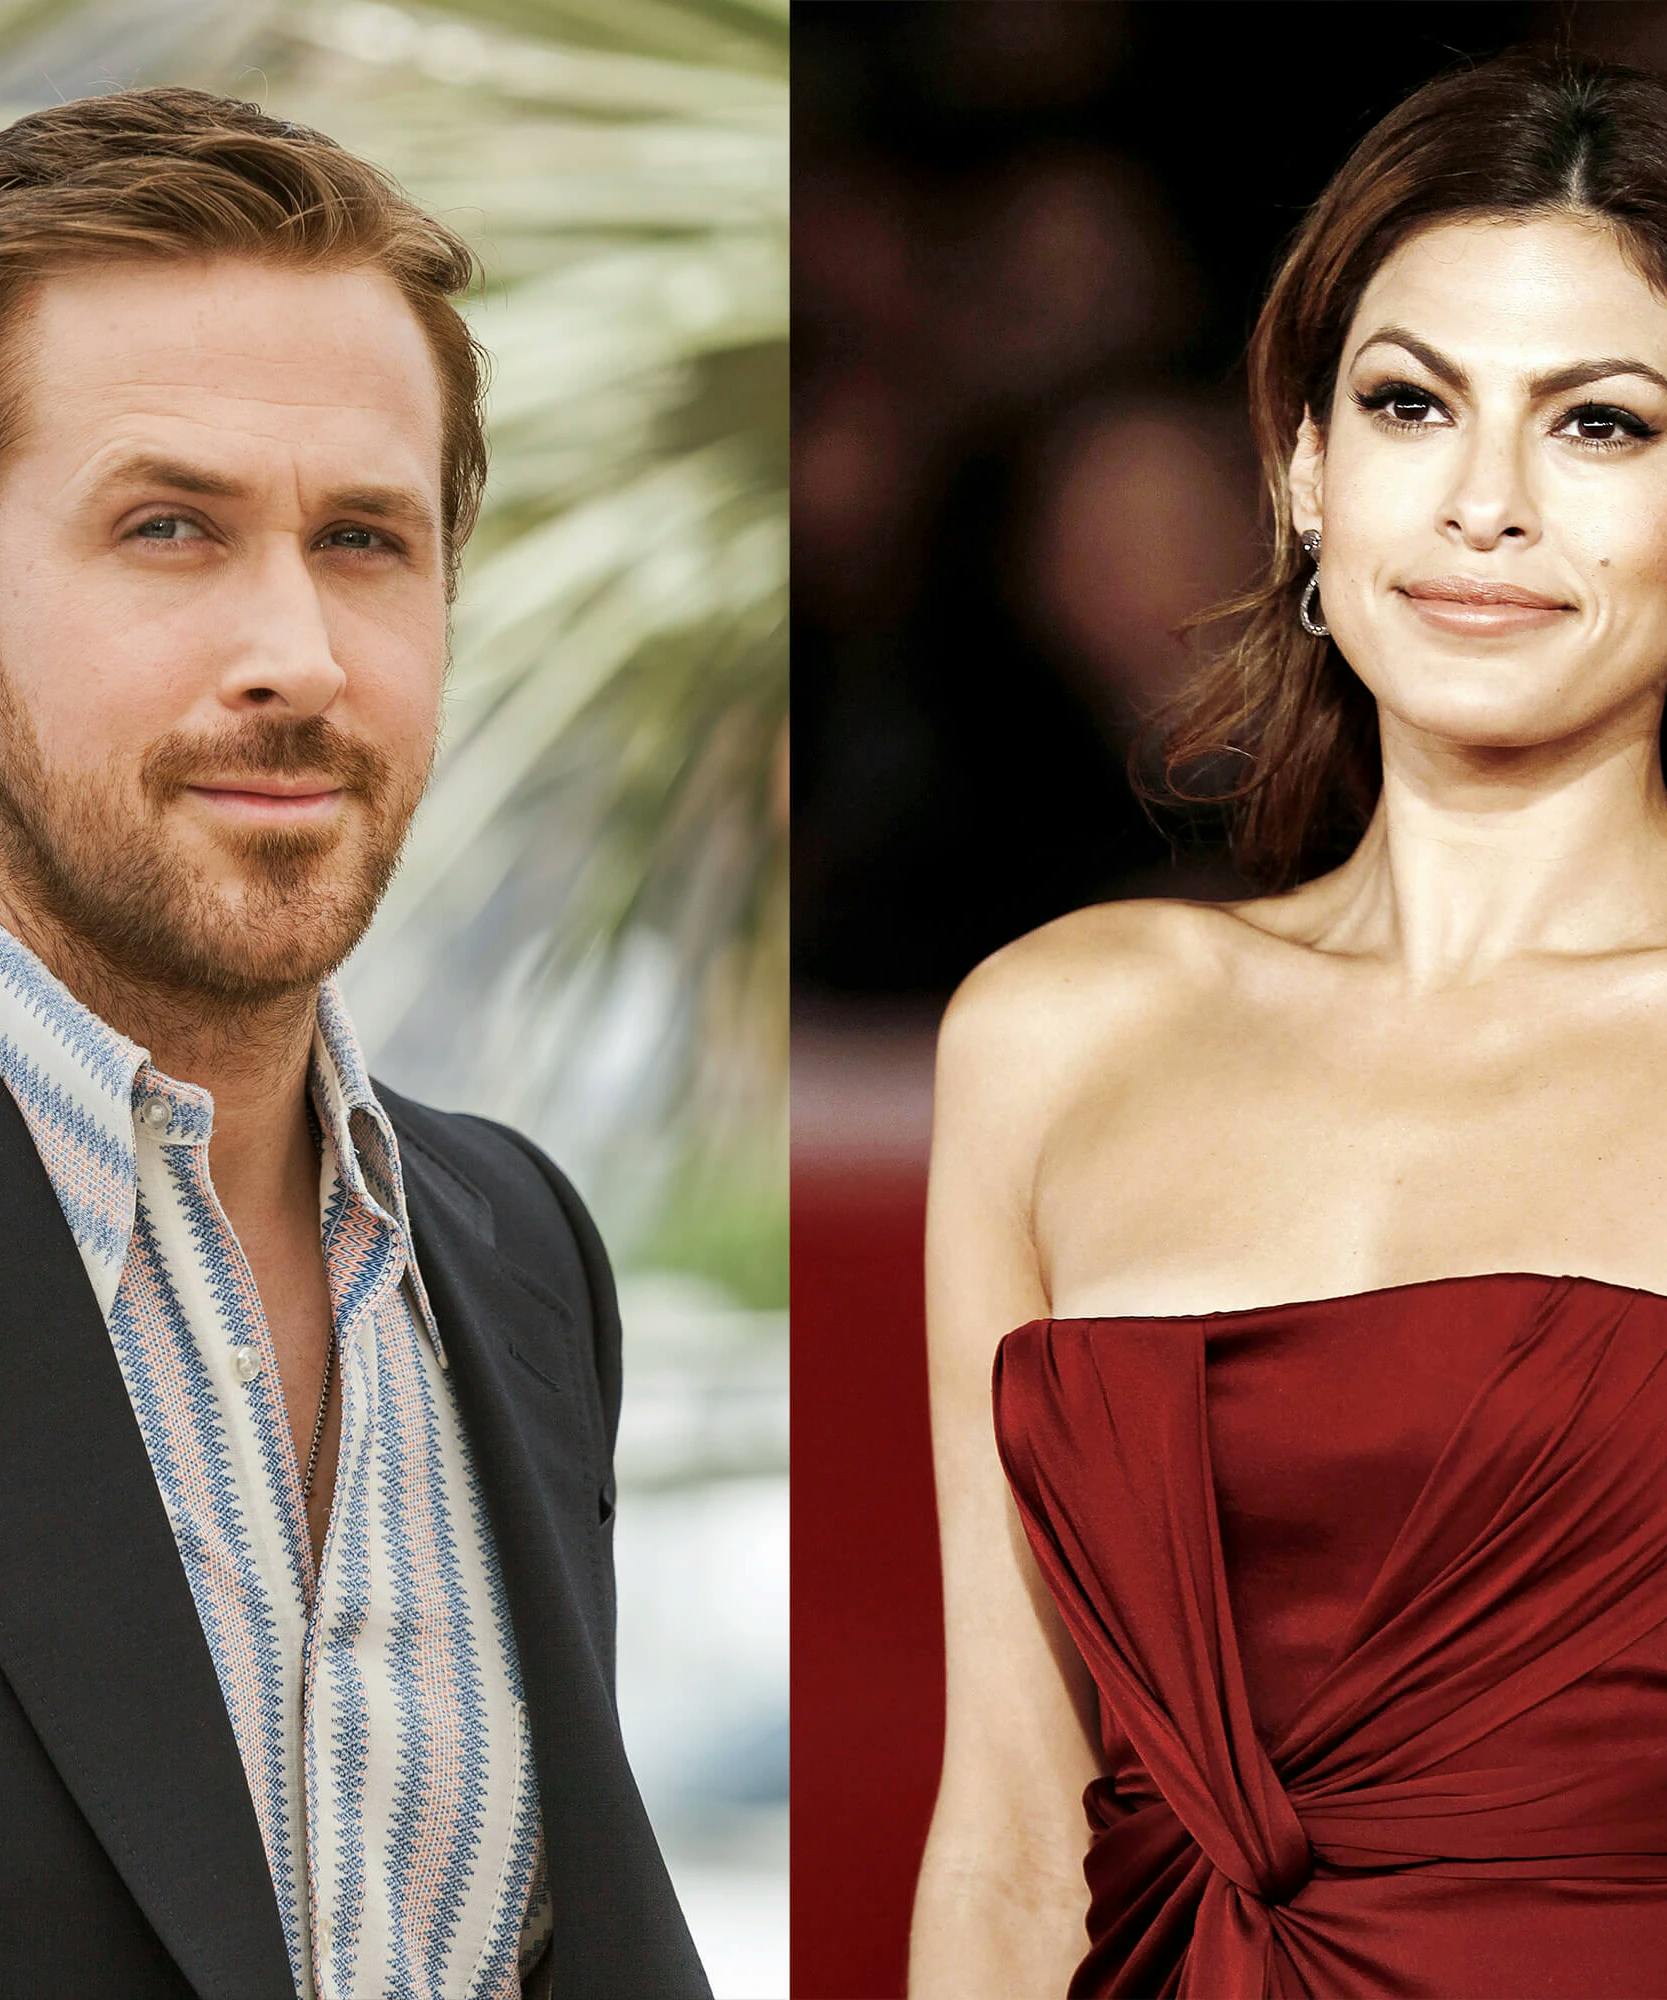 What We Can Learn From Eva Mendes And Ryan Gosling’s Amazing Relationship